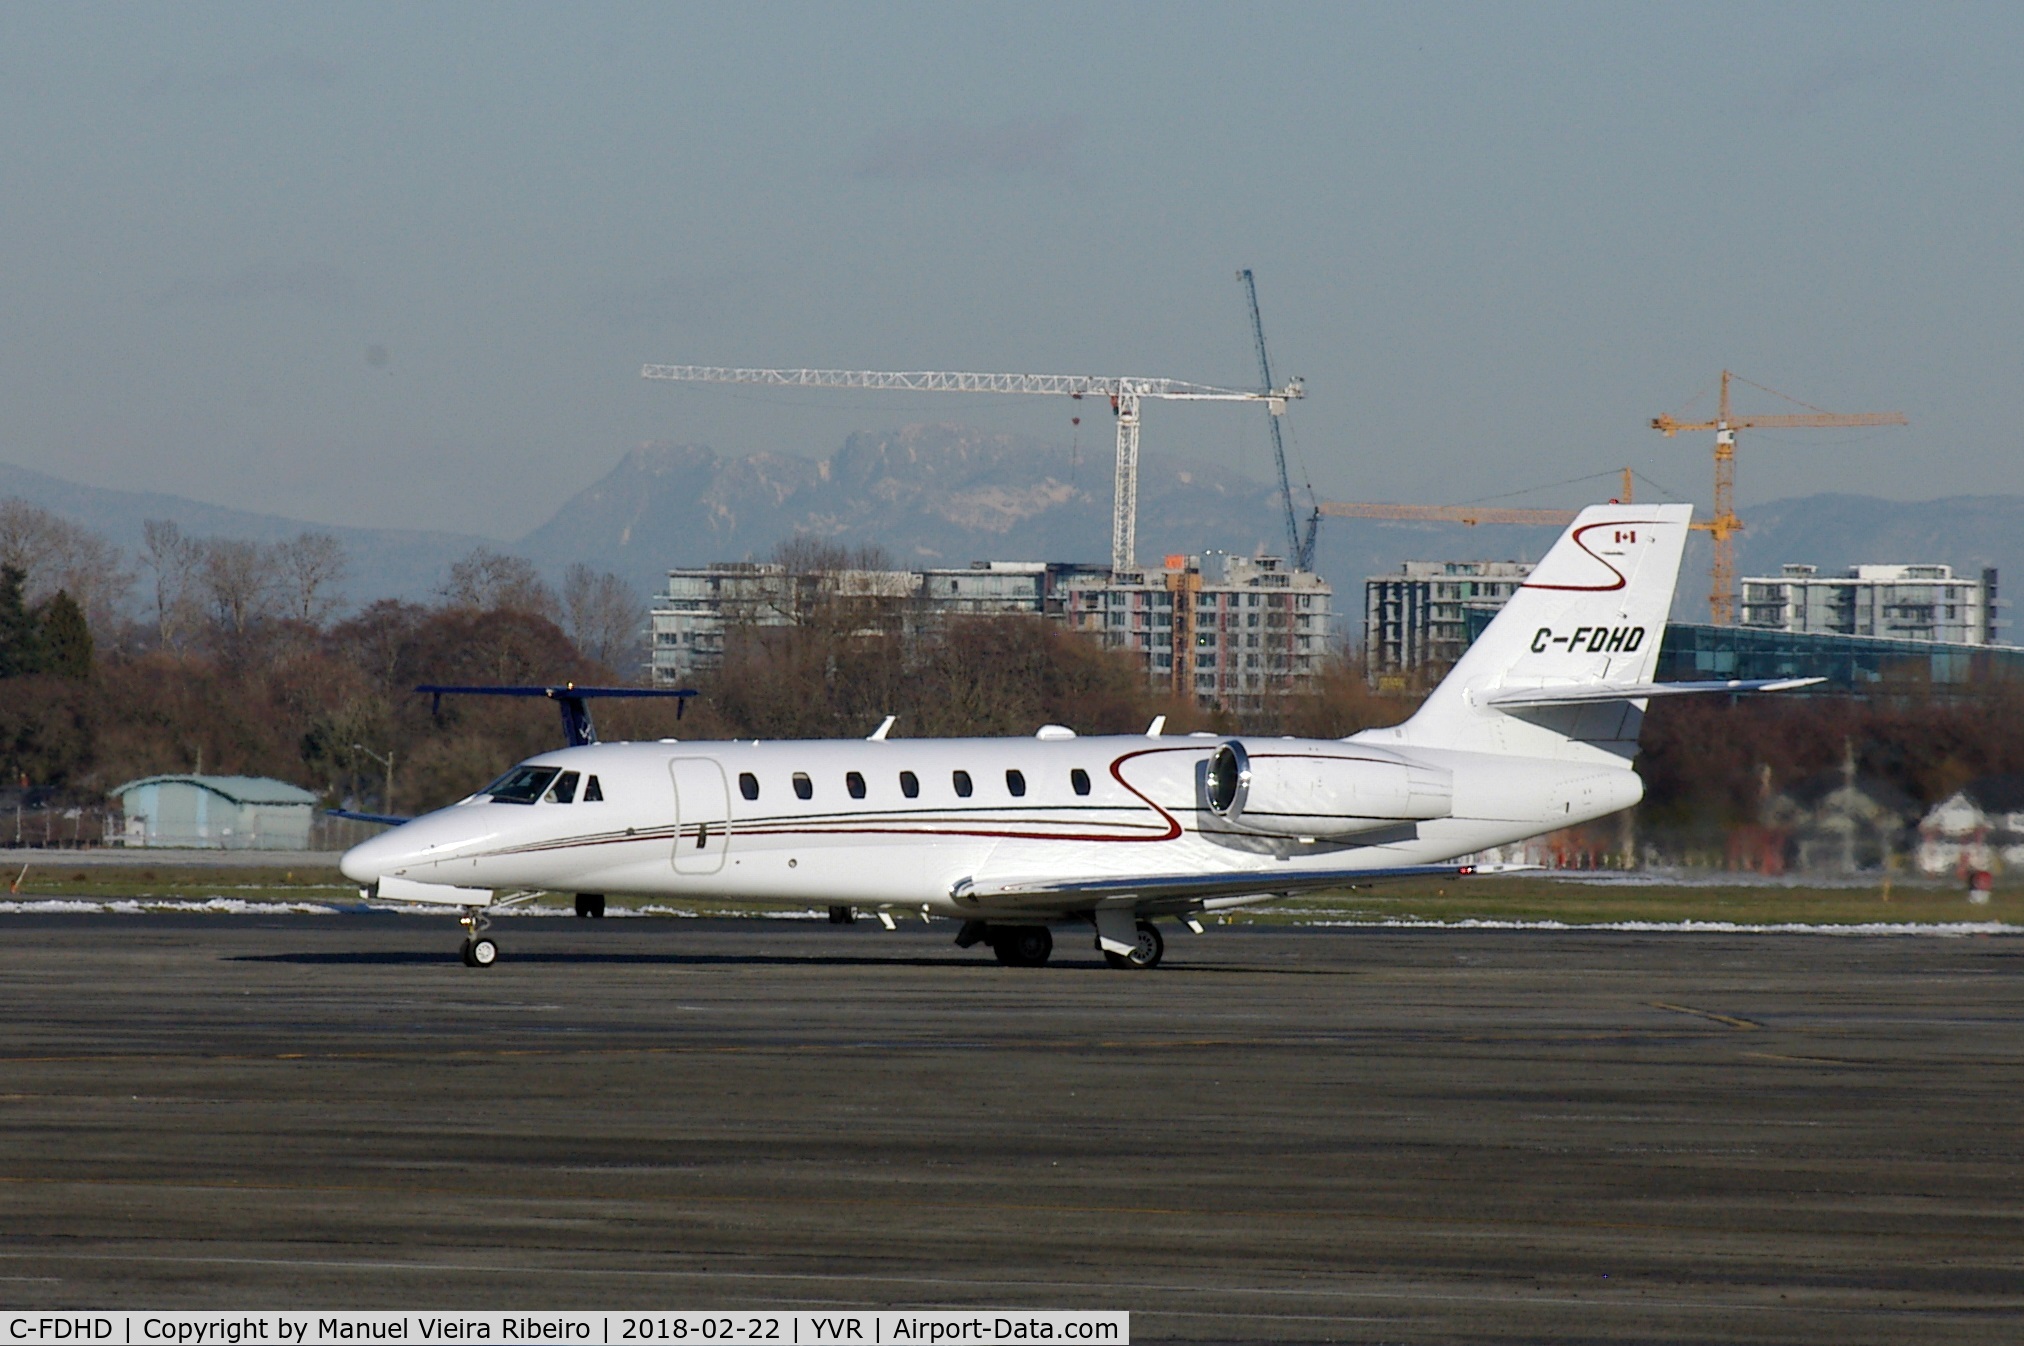 C-FDHD, 2005 Cessna 680 Citation Sovereign C/N 680-0032, At YVR South Terminal